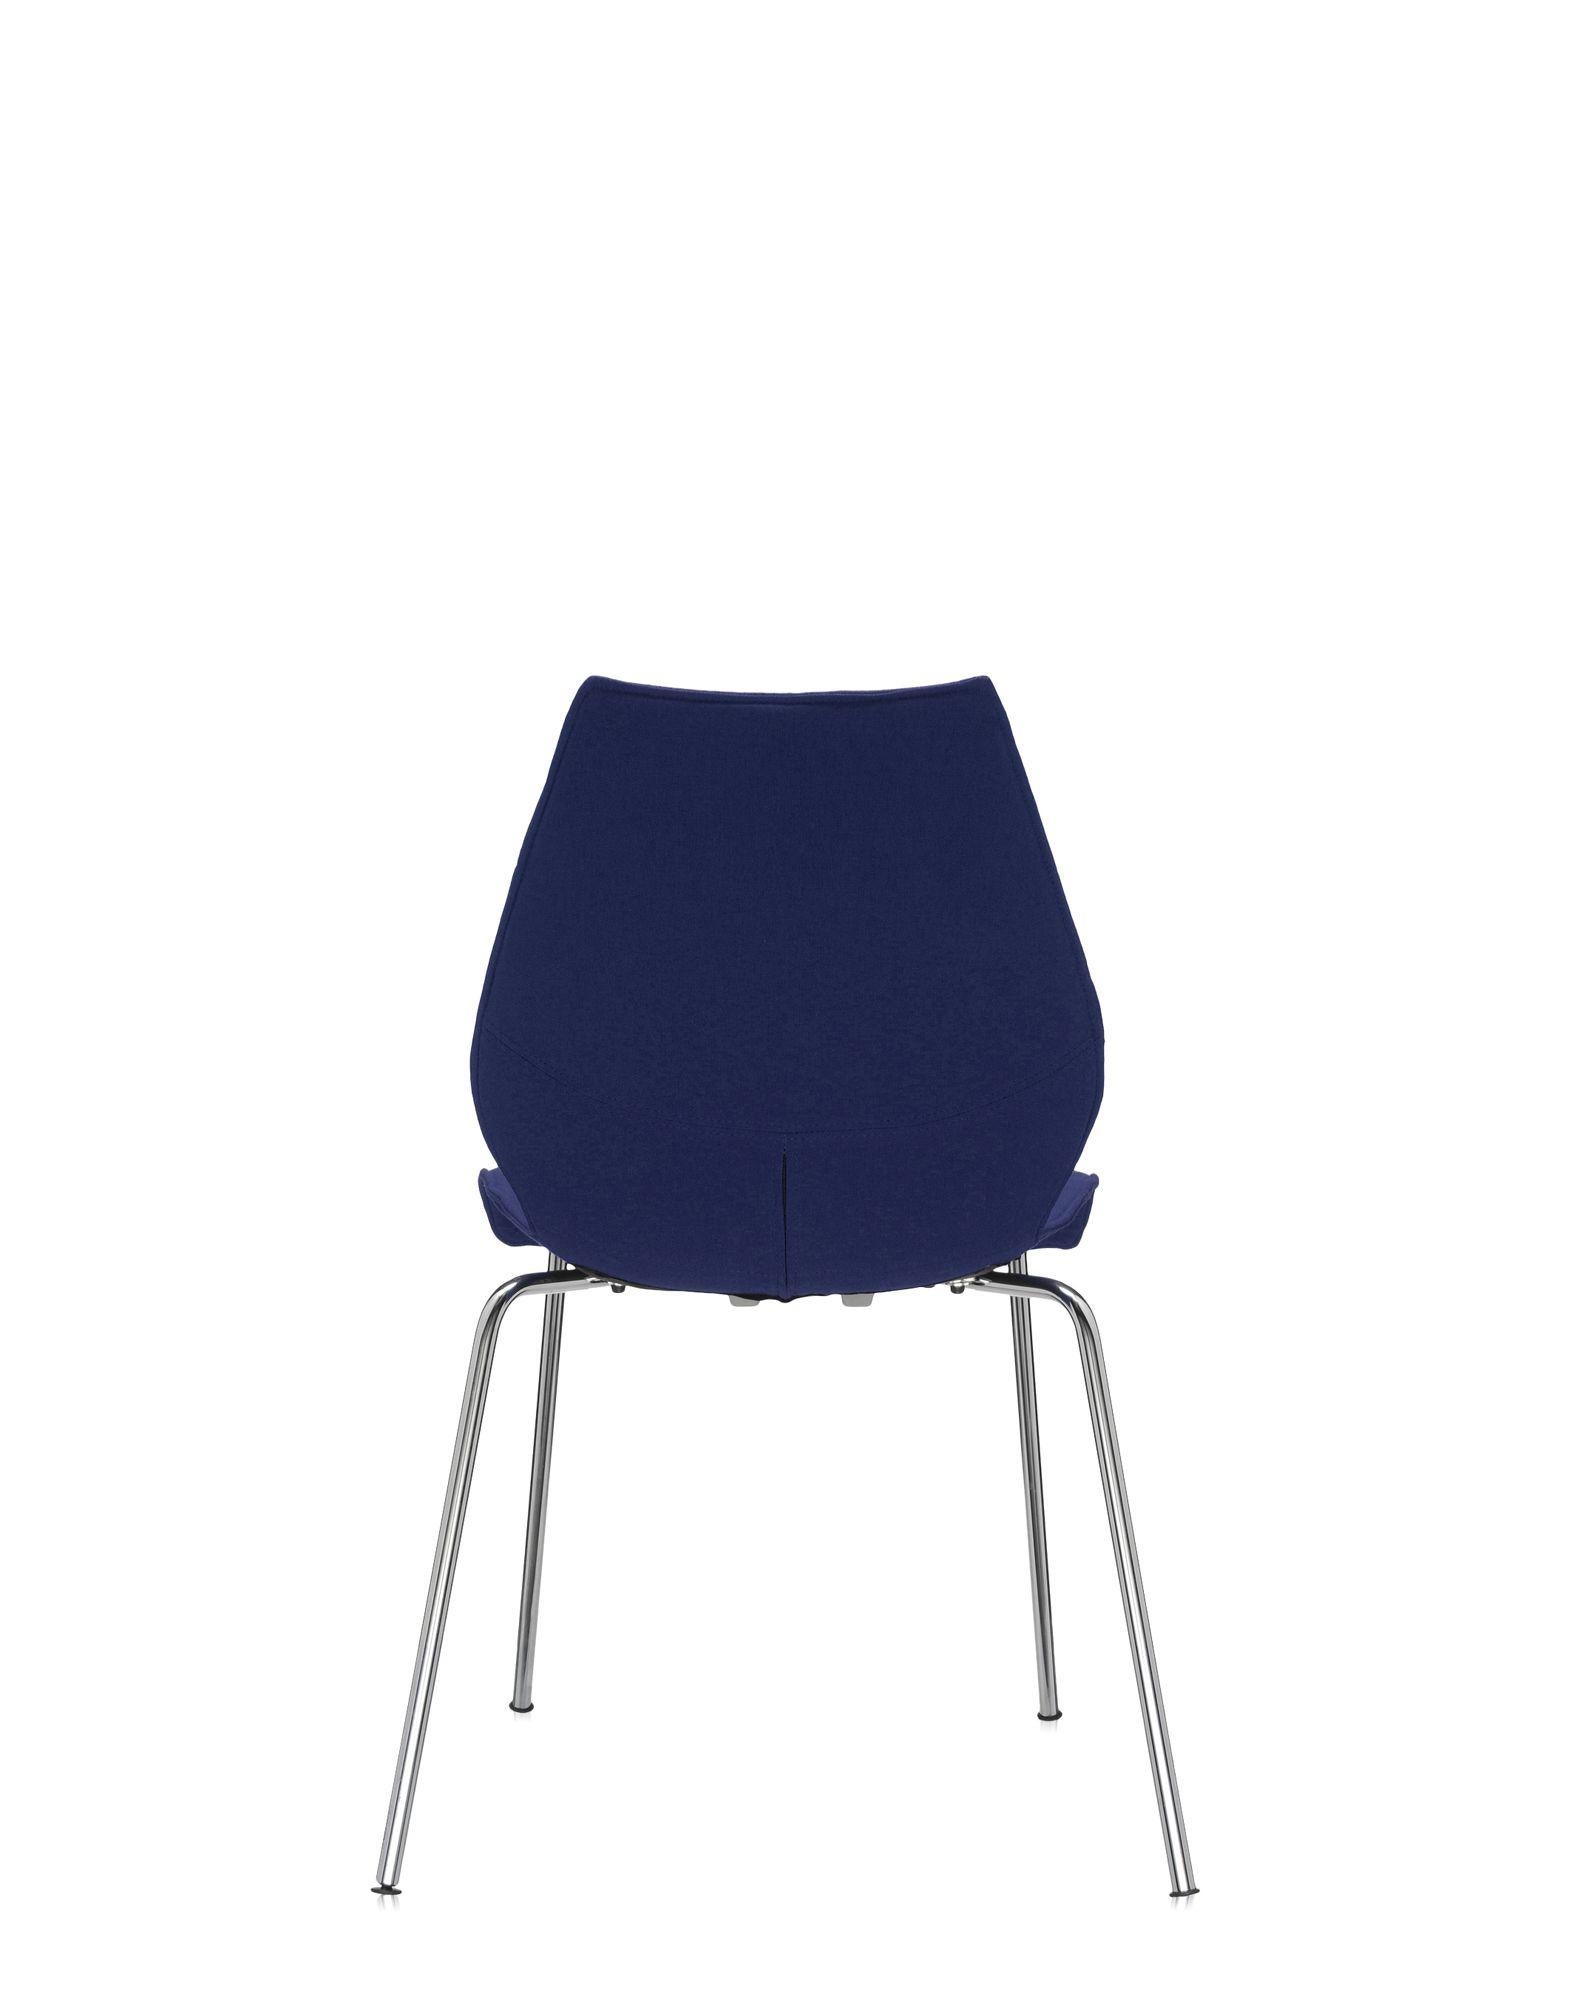 Italian Set of 2 Kartell Maui Soft Trevira Chair in Blue by Vico Magistretti